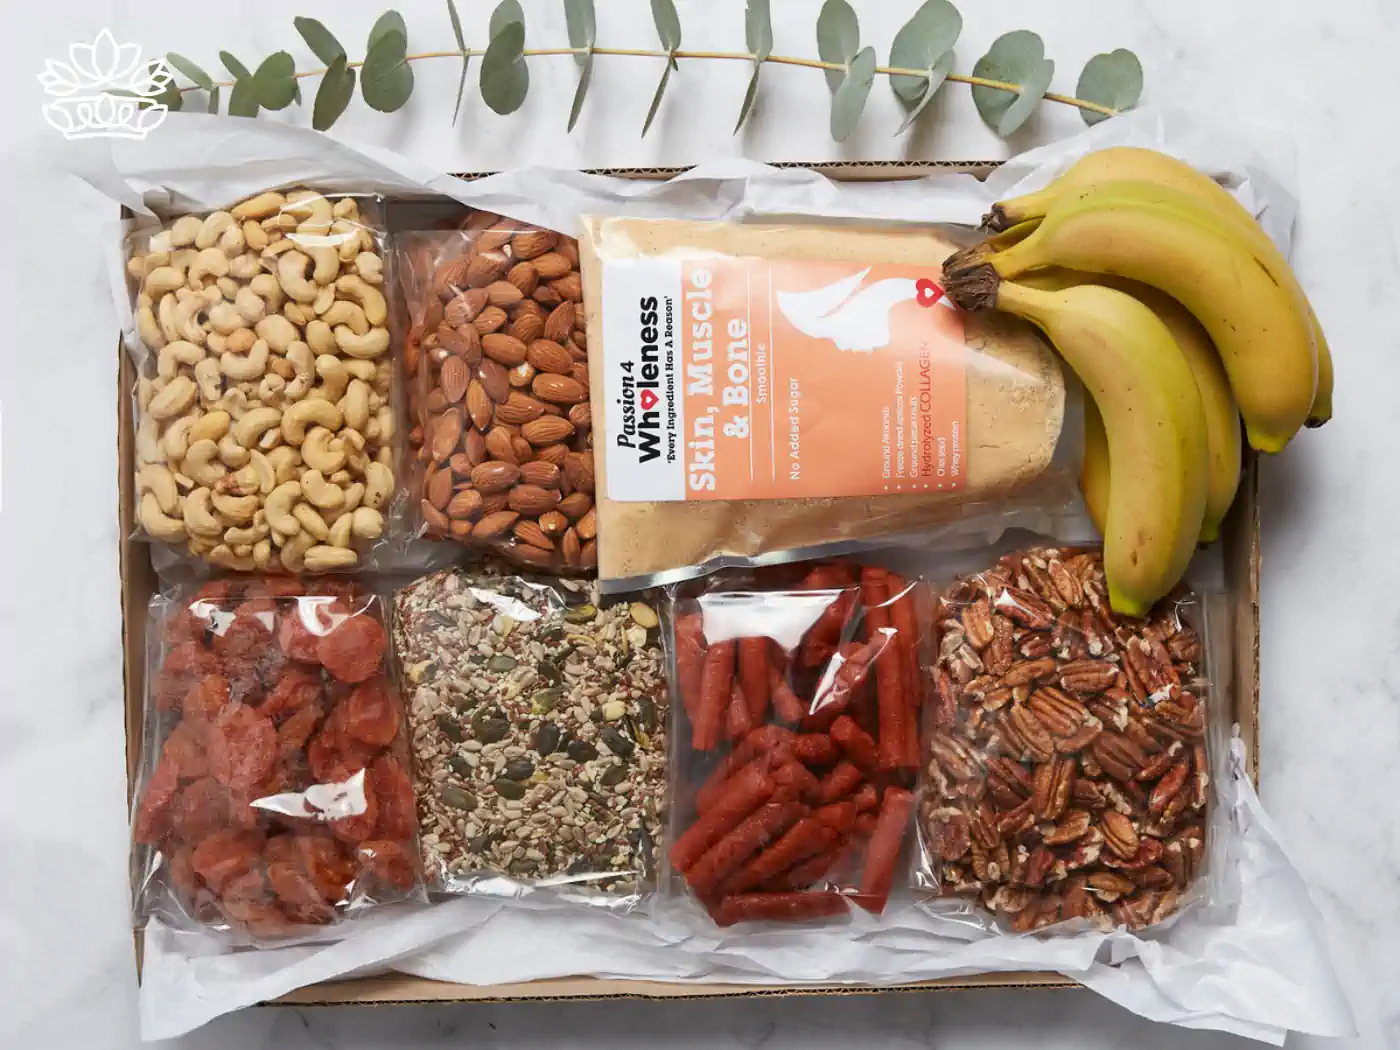 Assortment of healthy snacks including cashews, almonds, dried strawberries, seed mix, pecans, and bananas, neatly packaged in a box, from the mental health gift boxes by Fabulous Flowers and Gifts. Thoughtfully curated to enhance well-being and delivered with care.